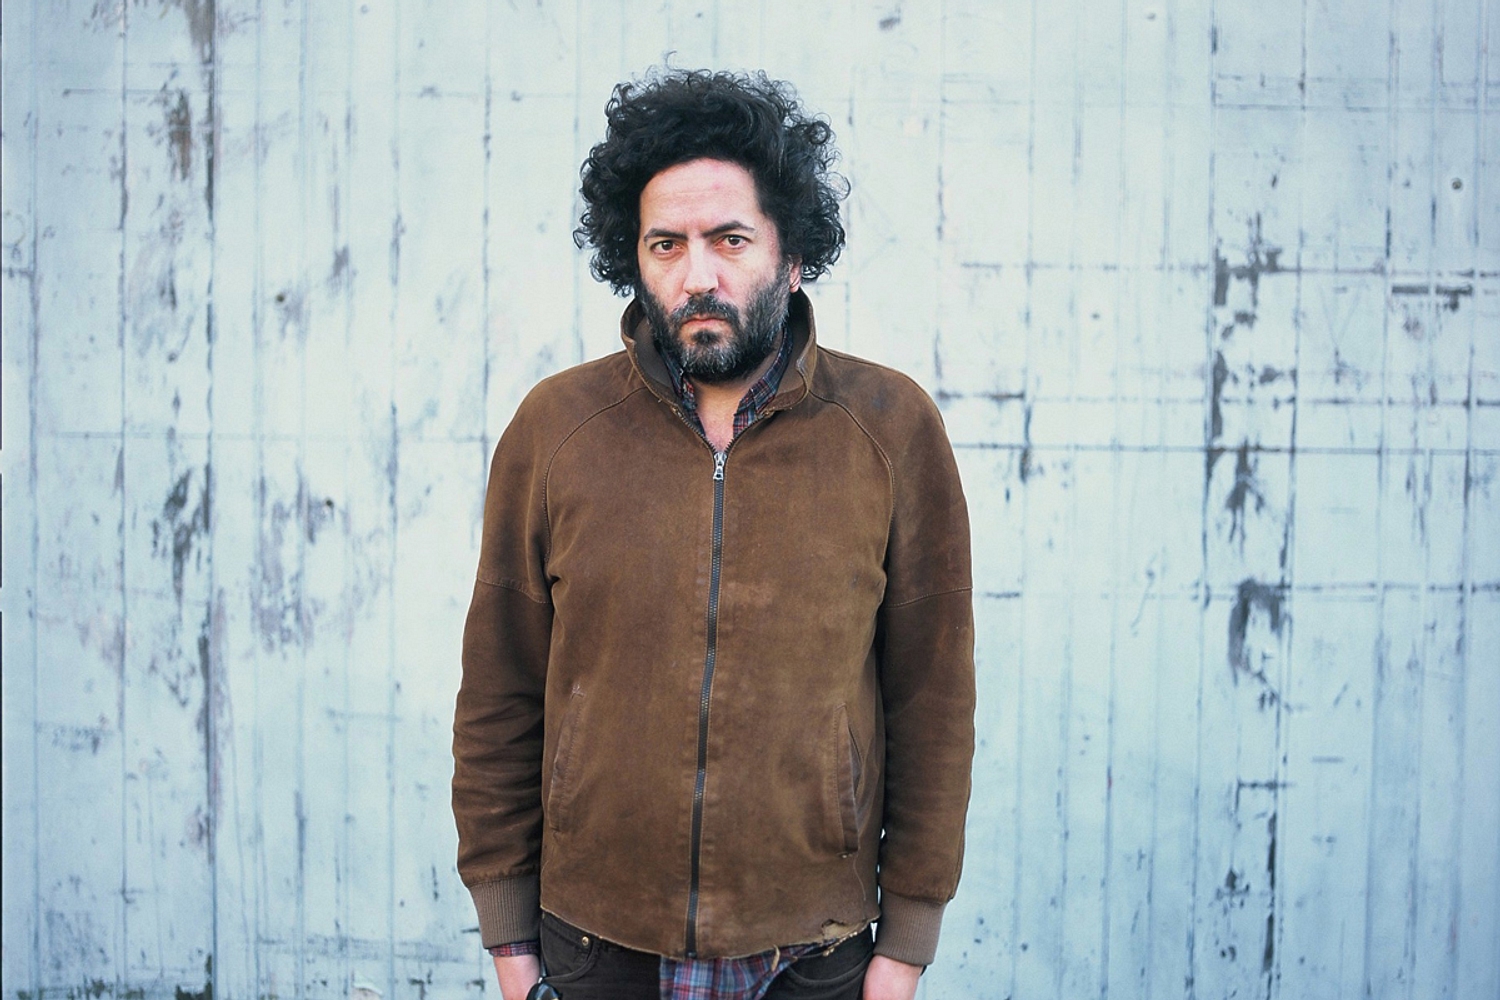 Destroyer: “I’ve always suffered from delusions of grandeur"